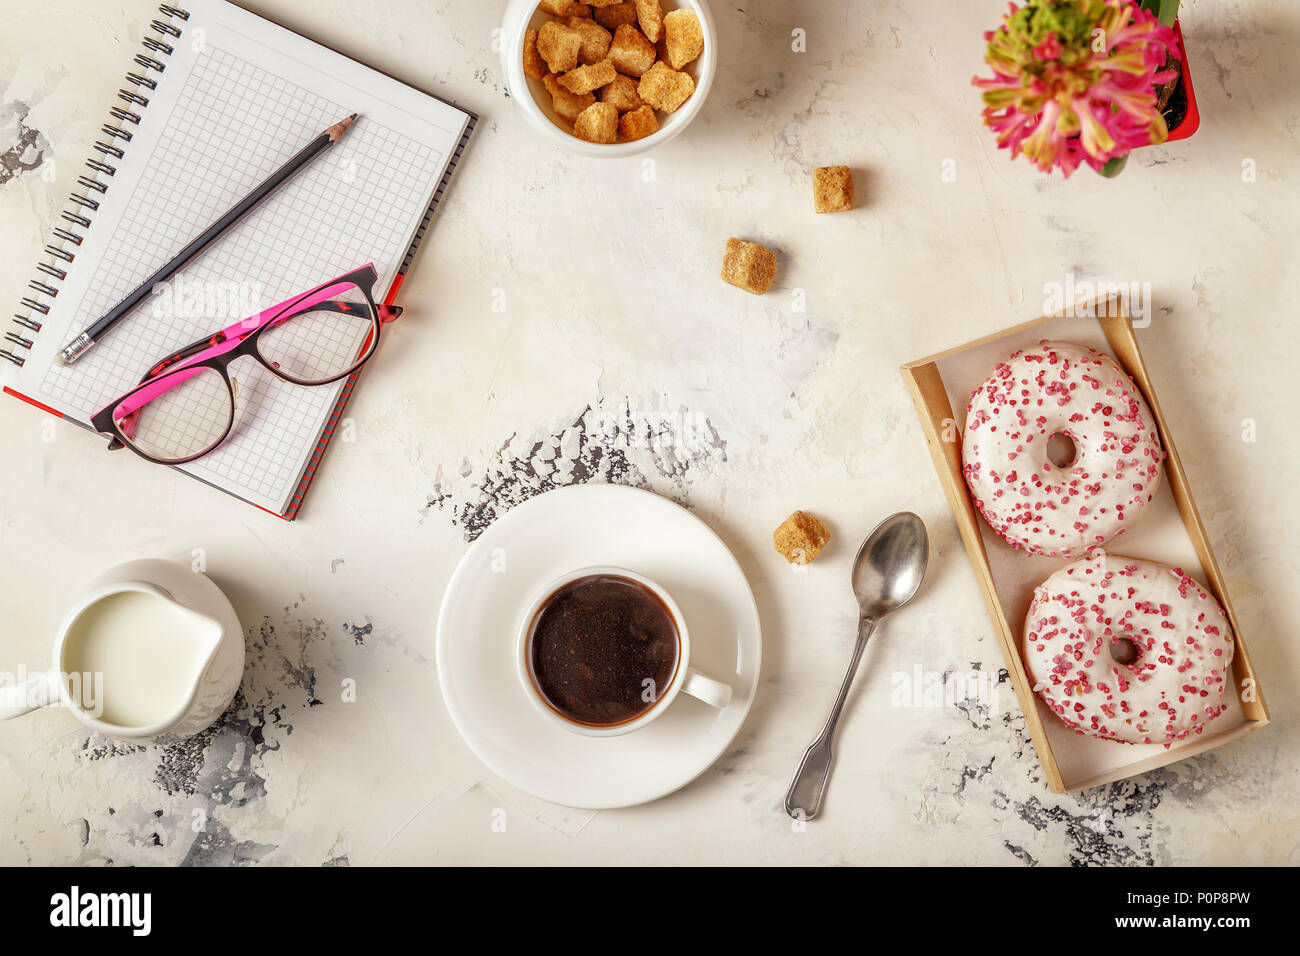 Notepad, donuts and coffee on white table. Top view with copy space. Stock Photo